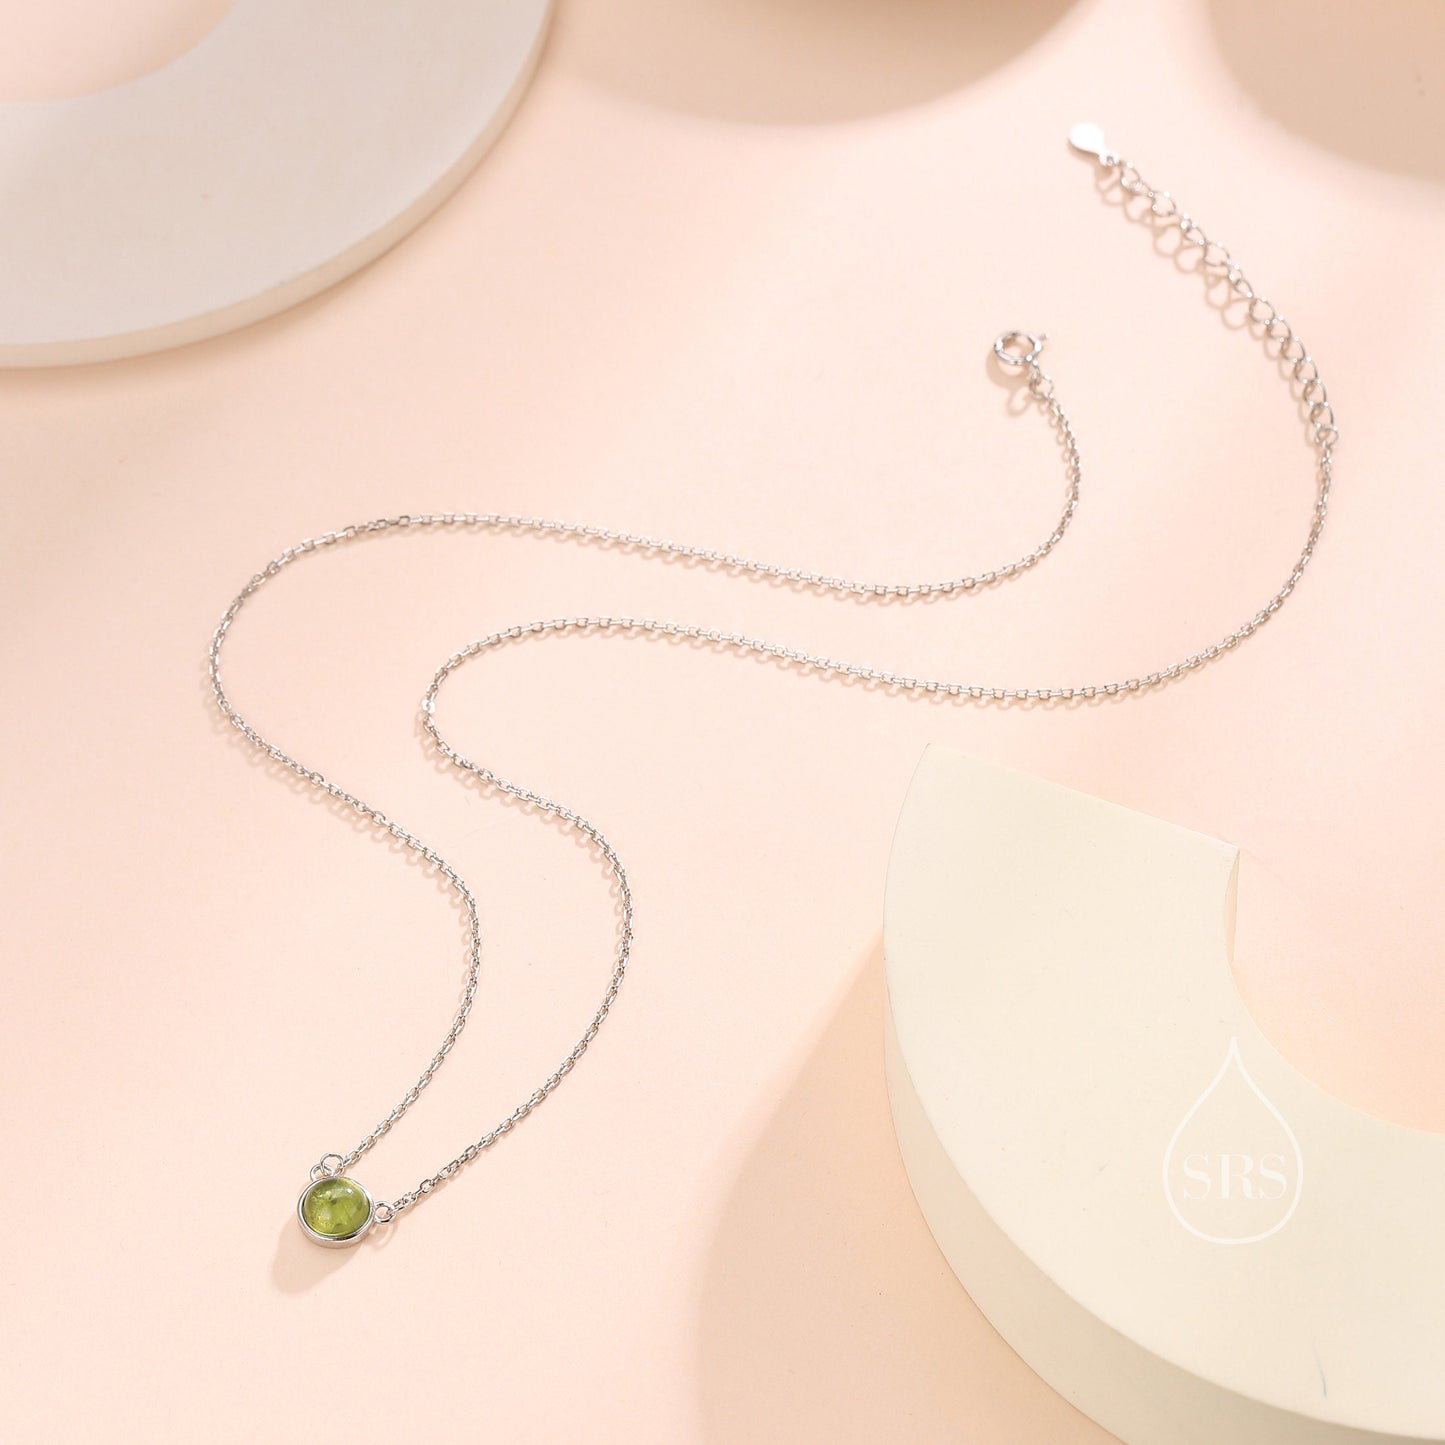 Sterling Silver Genuine Peridot Dainty Coin Pendant Necklace - Delicate Crystal Coin Necklace, August Birthstone